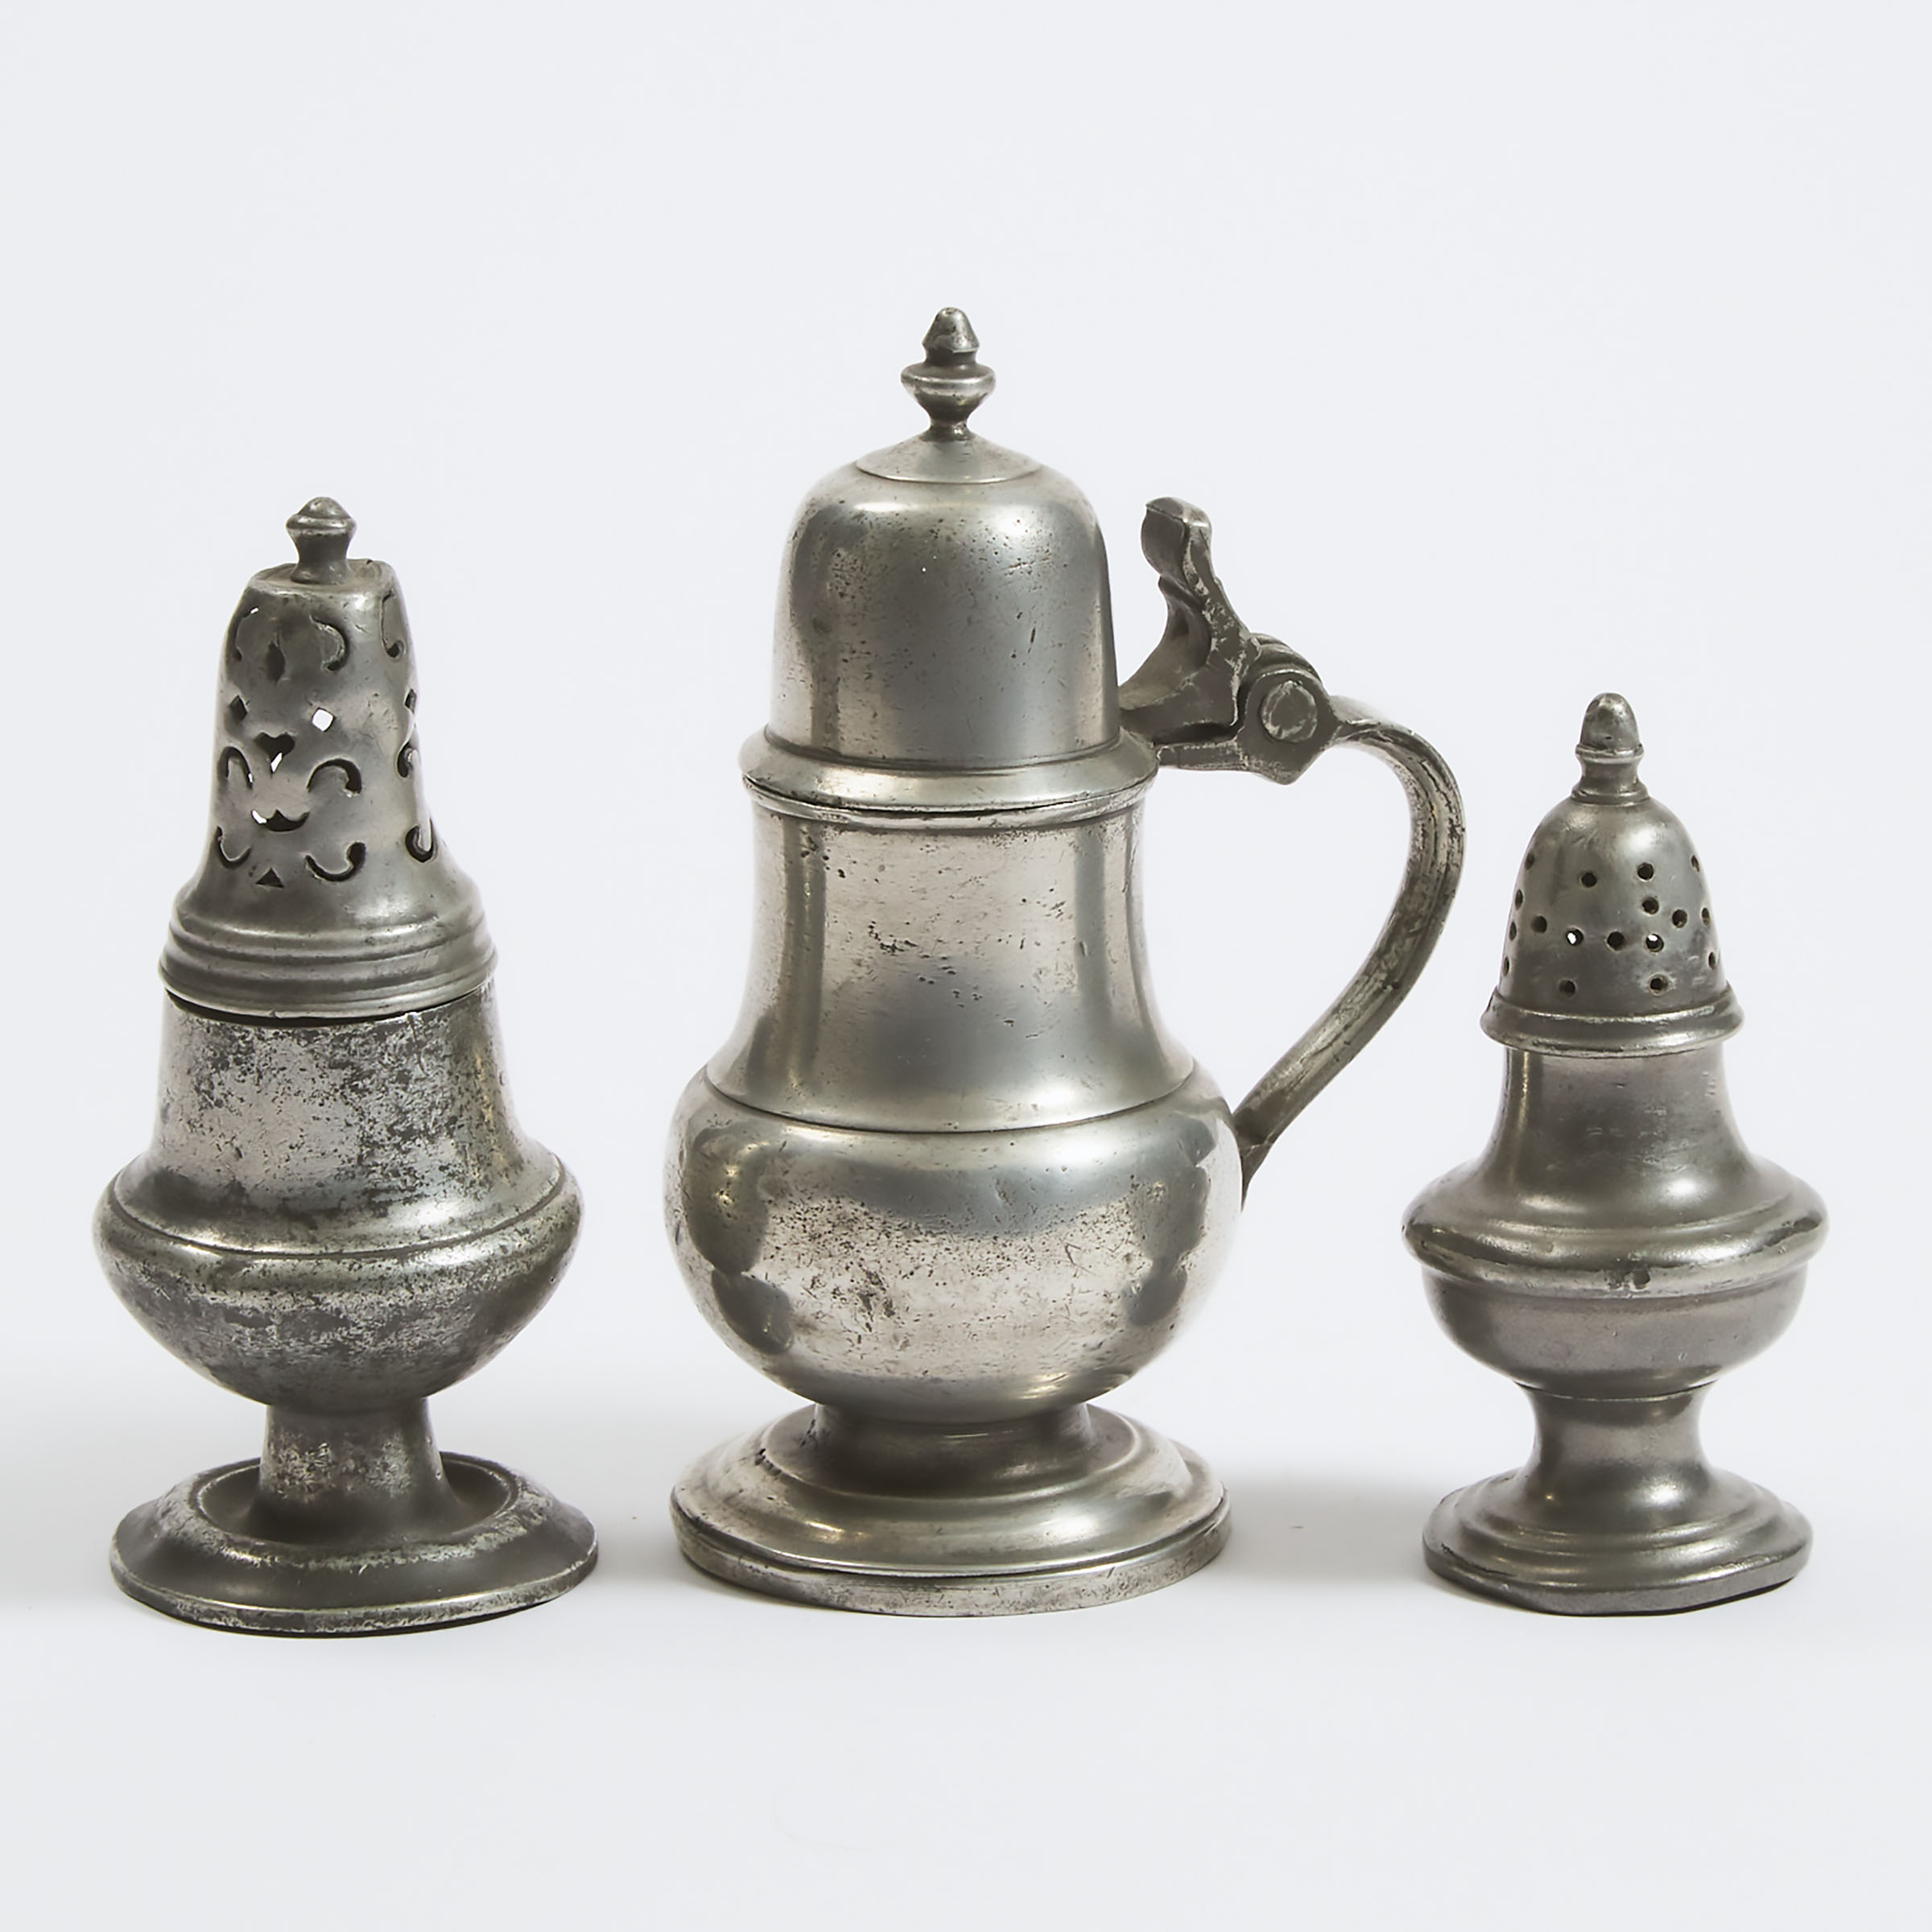 Group of English and Continental Pewter, 19th century